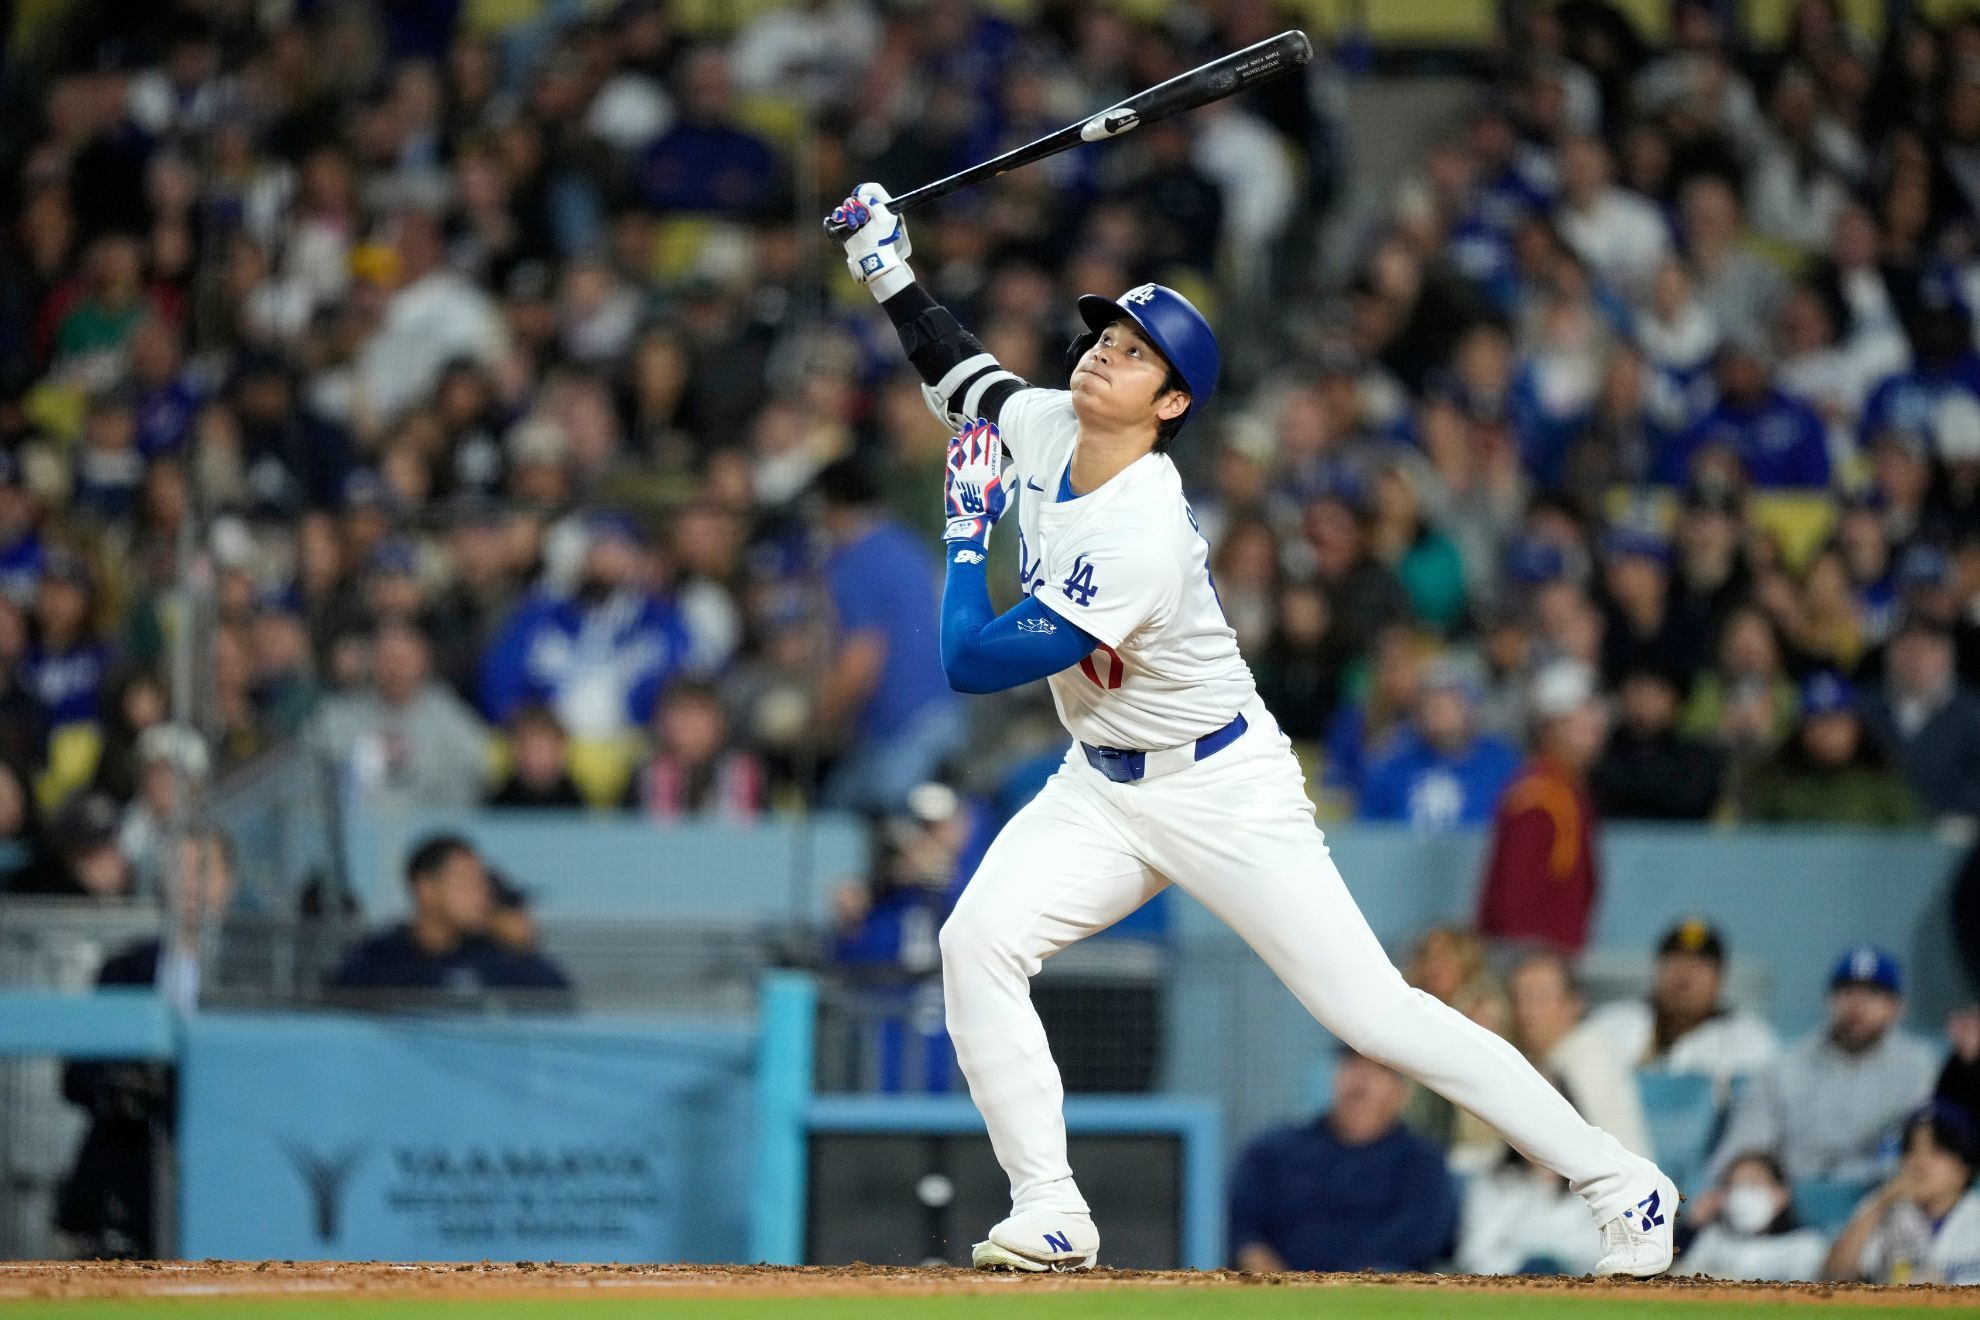 Dodgers clubhouse backed Shohei Ohtani and knew he was innocent